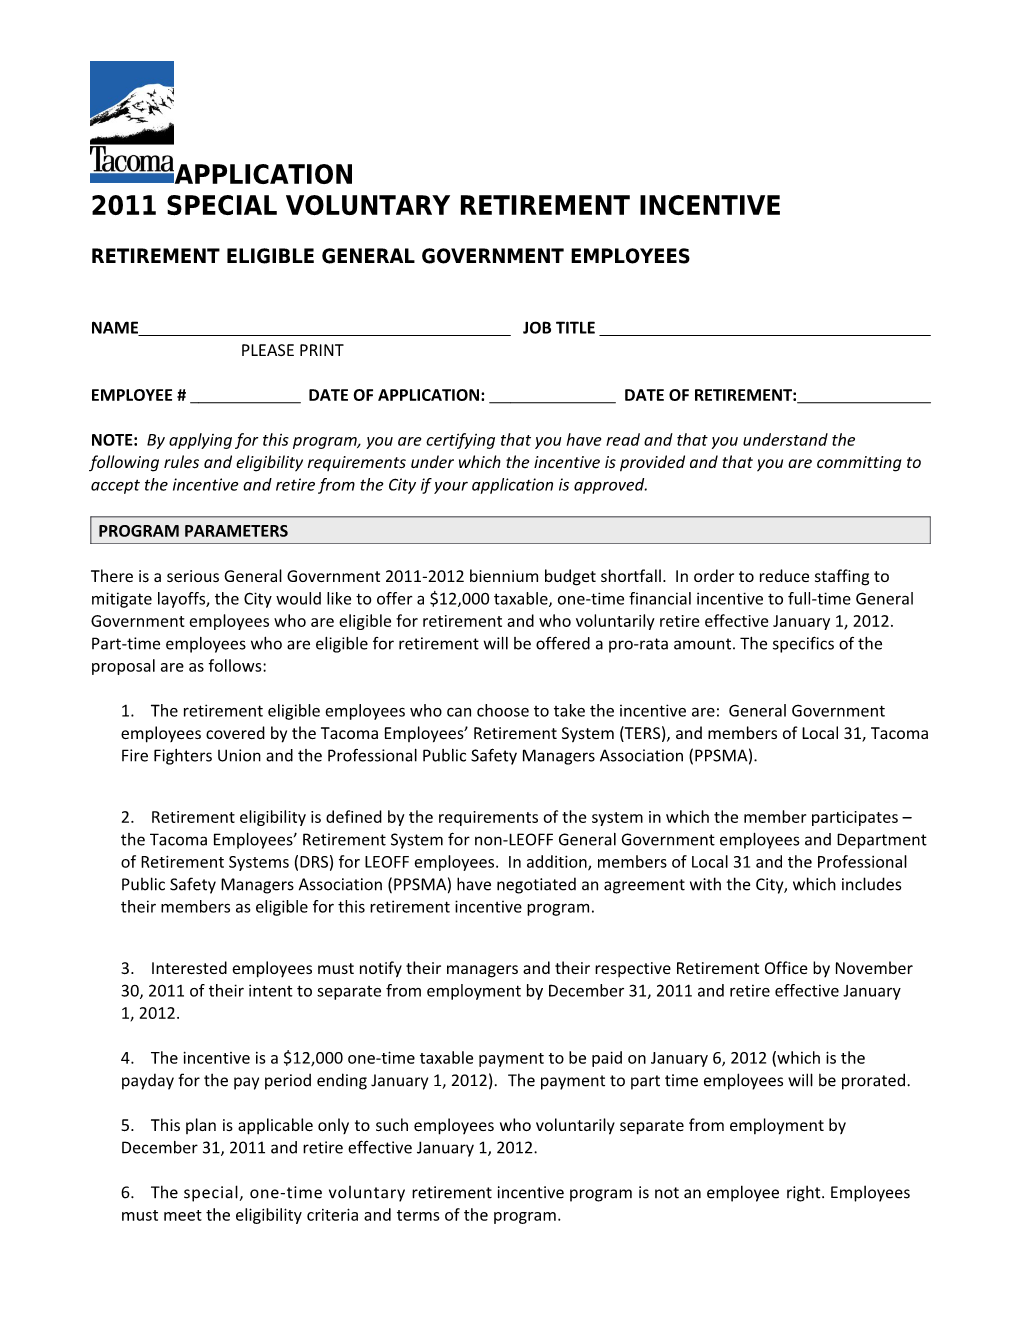 Employee # Date of Application: Date of Retirement